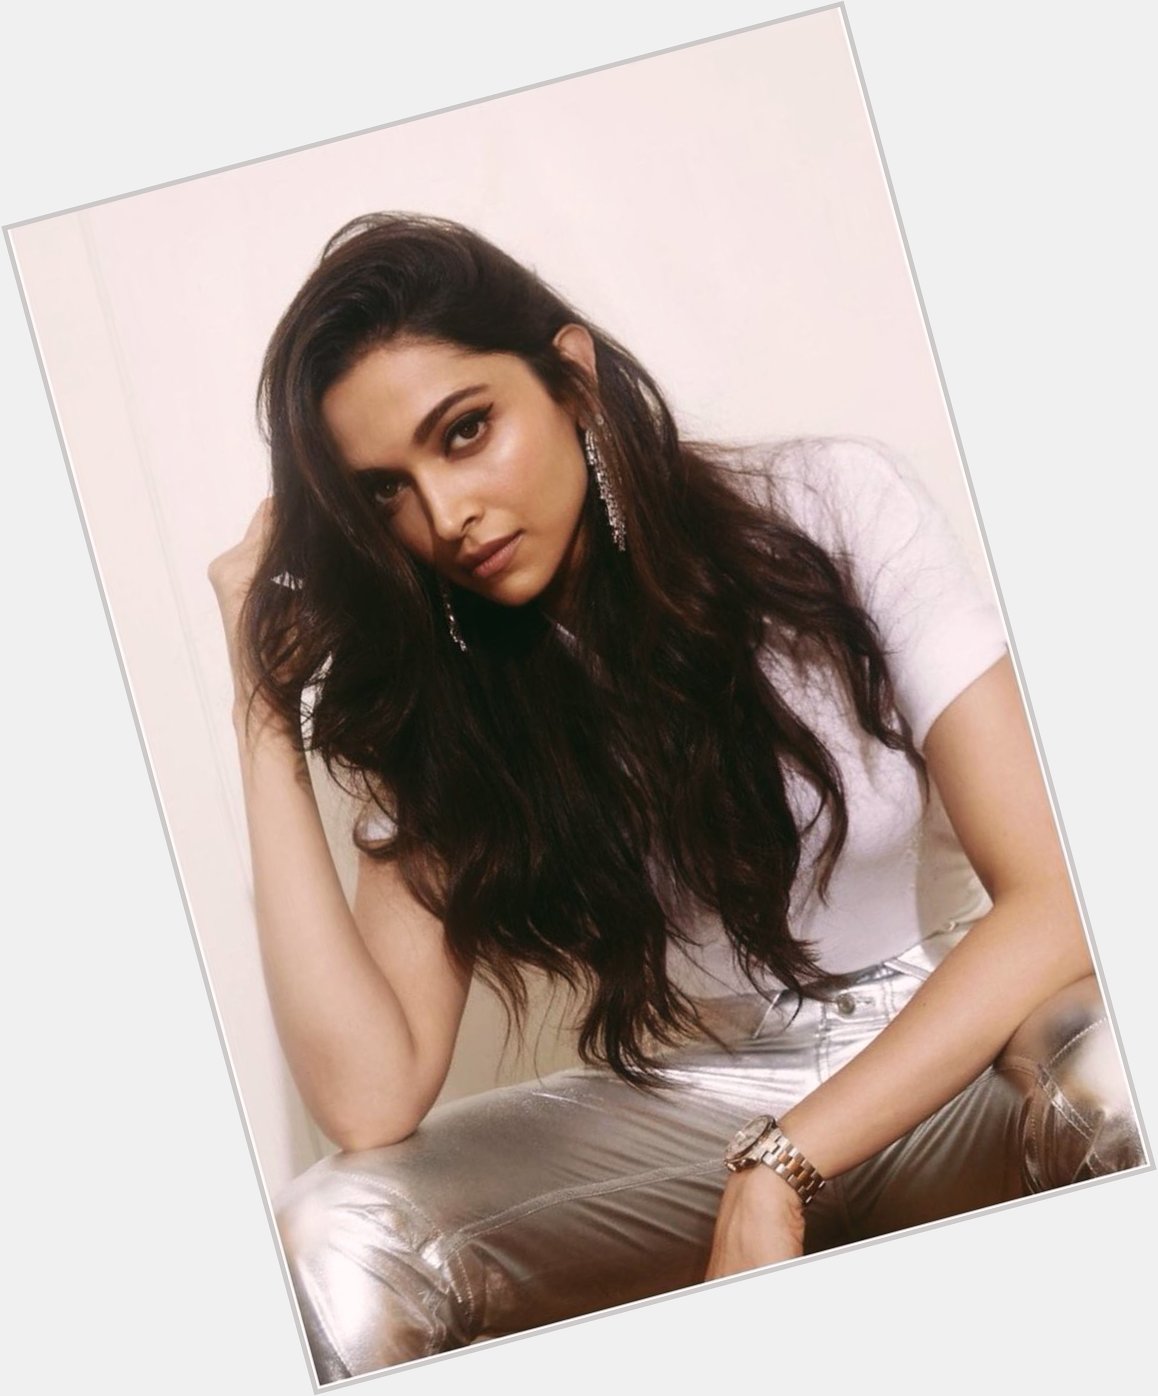 Happy birthday to one of the most objectively stunning human beings to ever exist, Miss Deepika Padukone! 